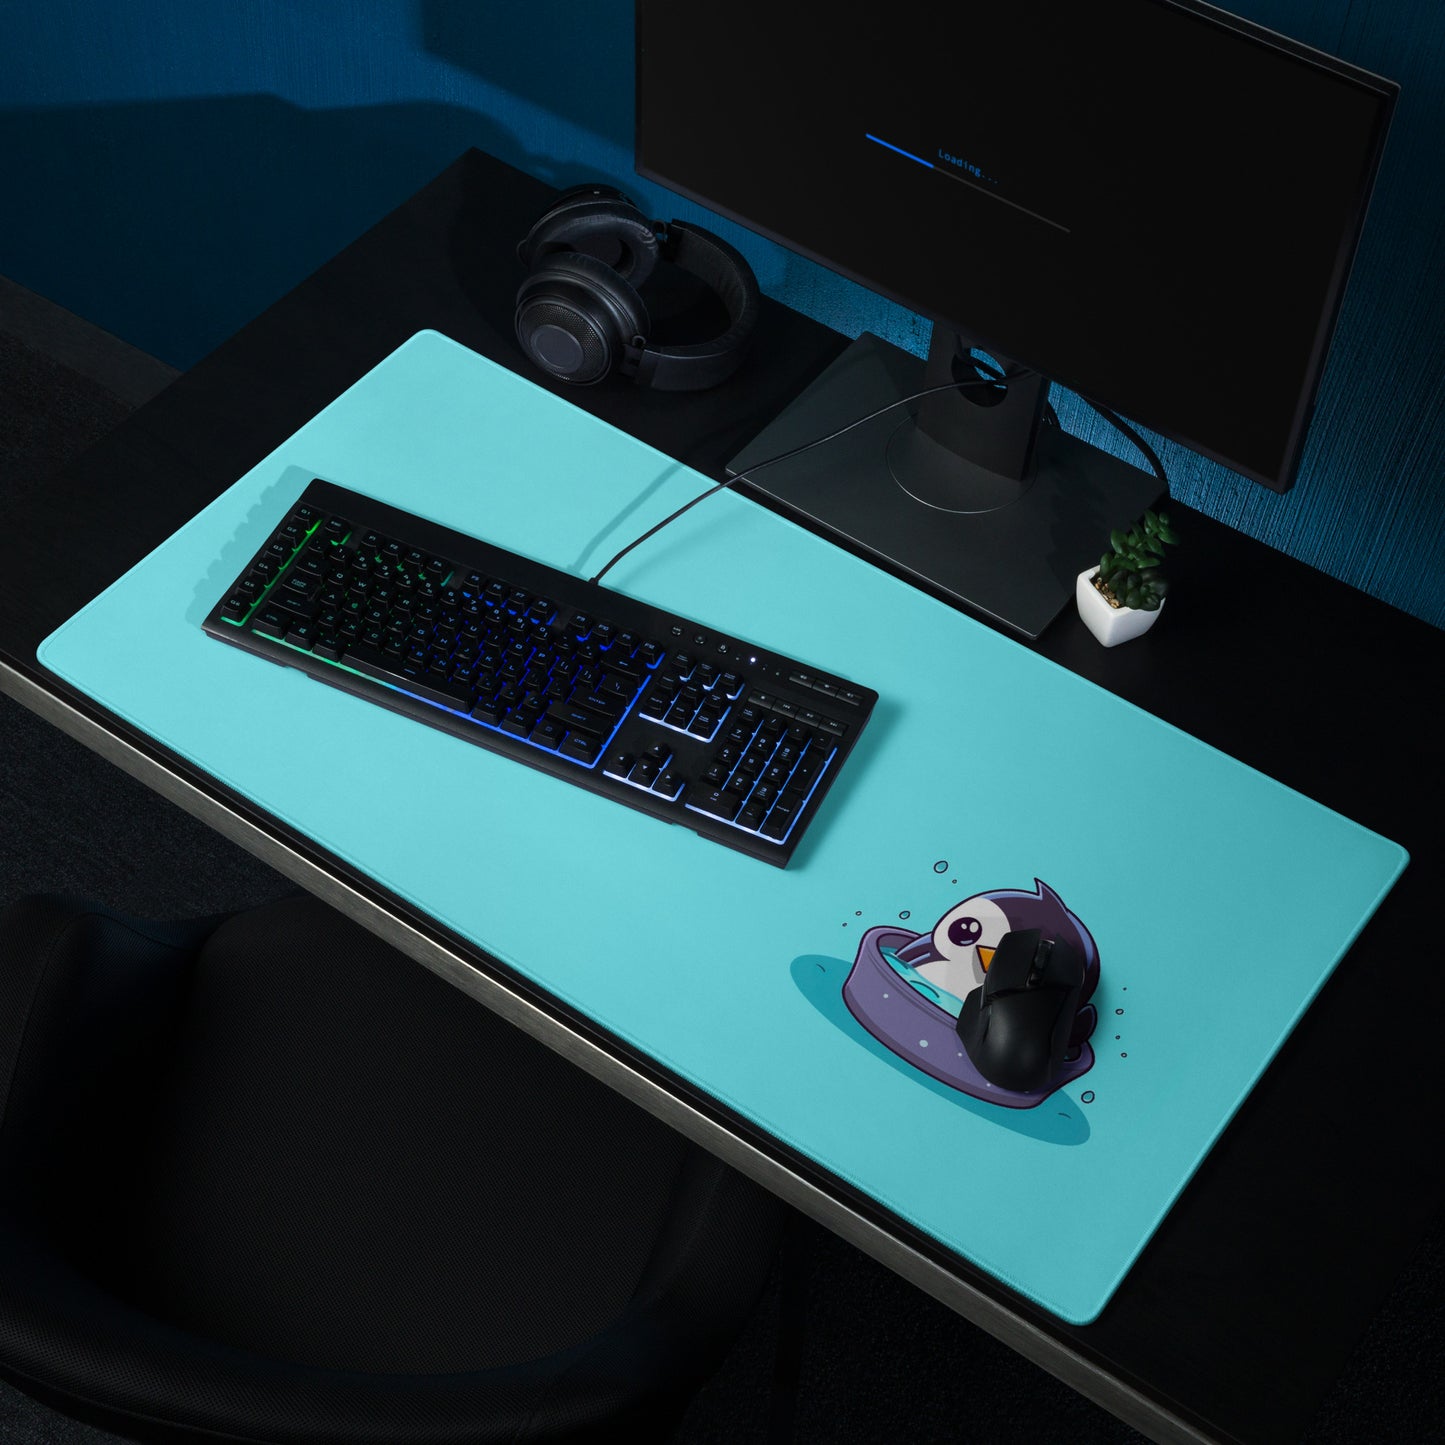 36" x 18" desk pad with a cute penguin sitting in an ice bath on it shown on a desk setup. Blue in color.